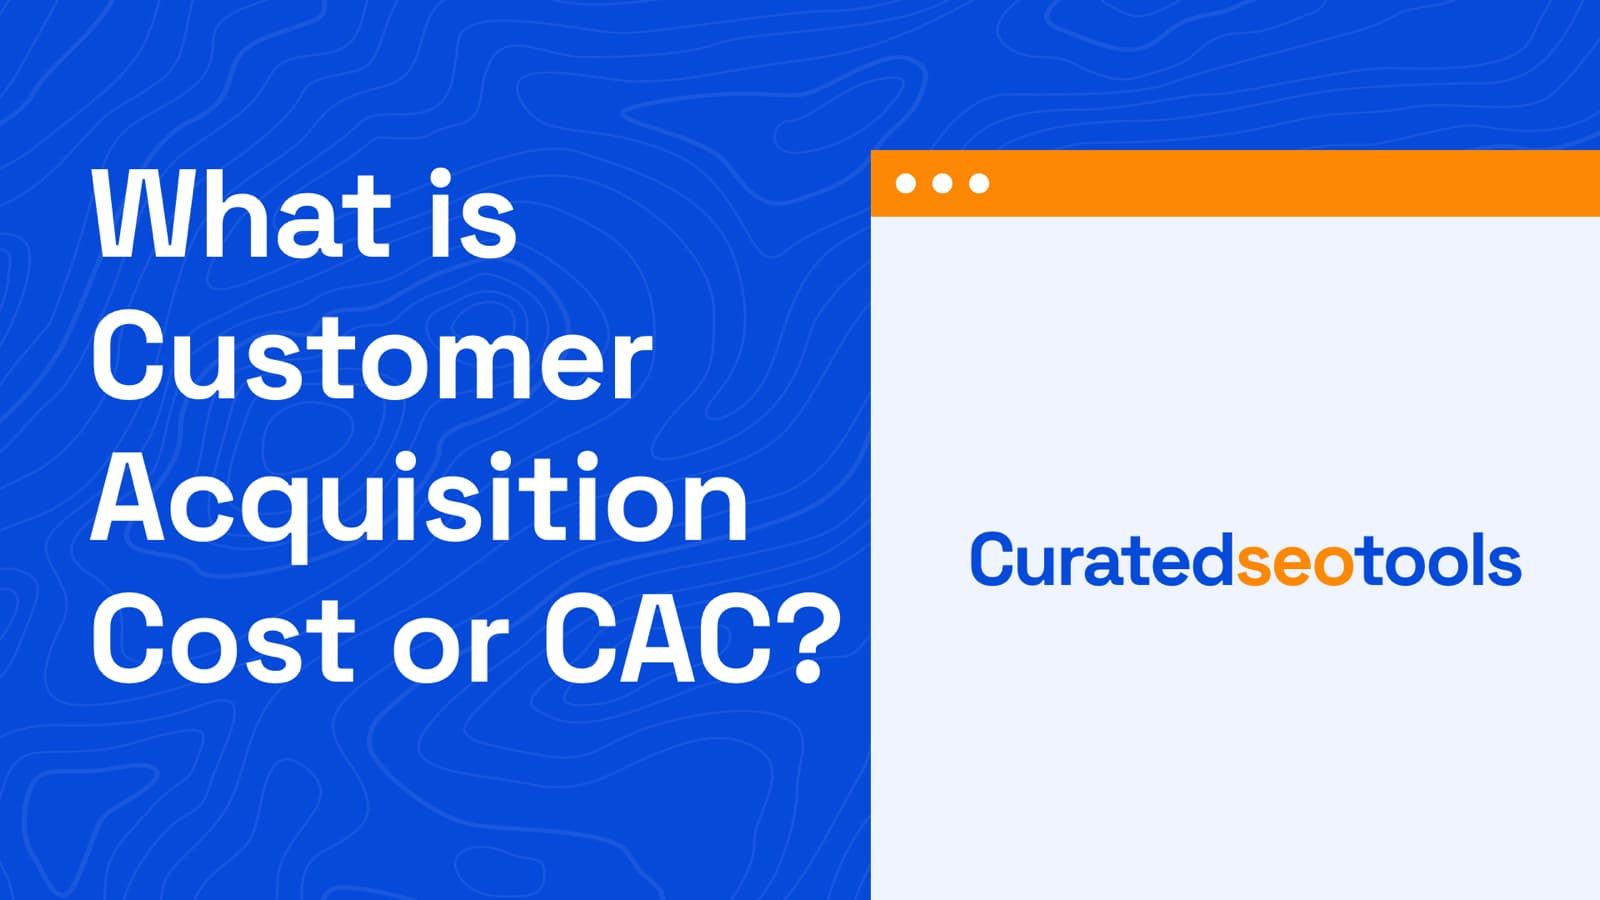 The cover image about the content title which is "What is customer acquisition cost?" and a browser shaped graphic element